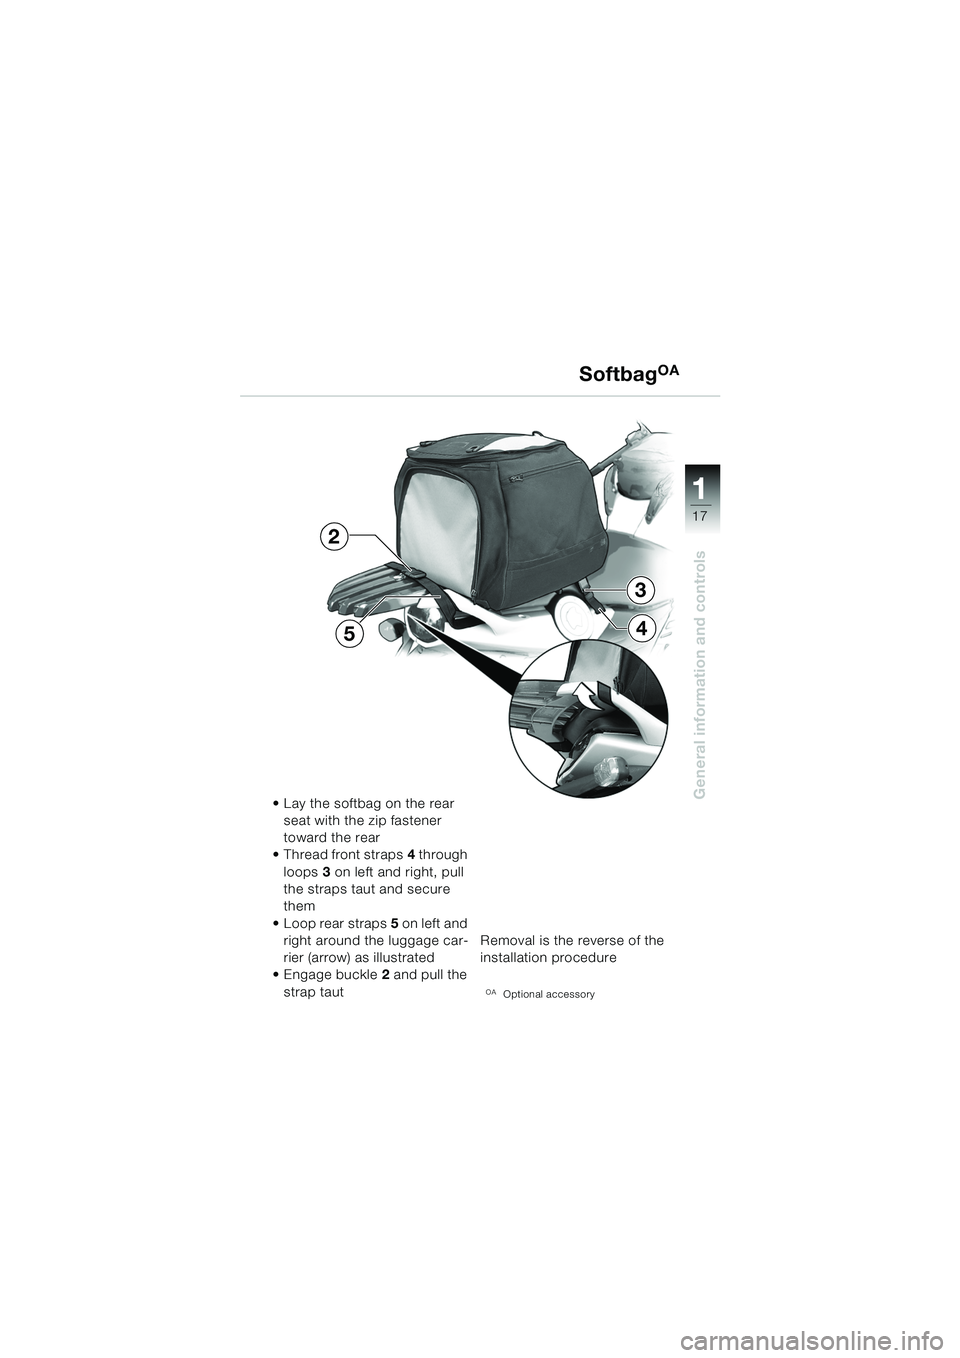 BMW MOTORRAD F 650 CS 2003  Riders Manual (in English) 111
17
General information and controls
SoftbagOA
• Lay the softbag on the rear seat with the zip fastener 
toward the rear
 Thread front straps 4 through 
loops  3 on left and right, pull 
the str